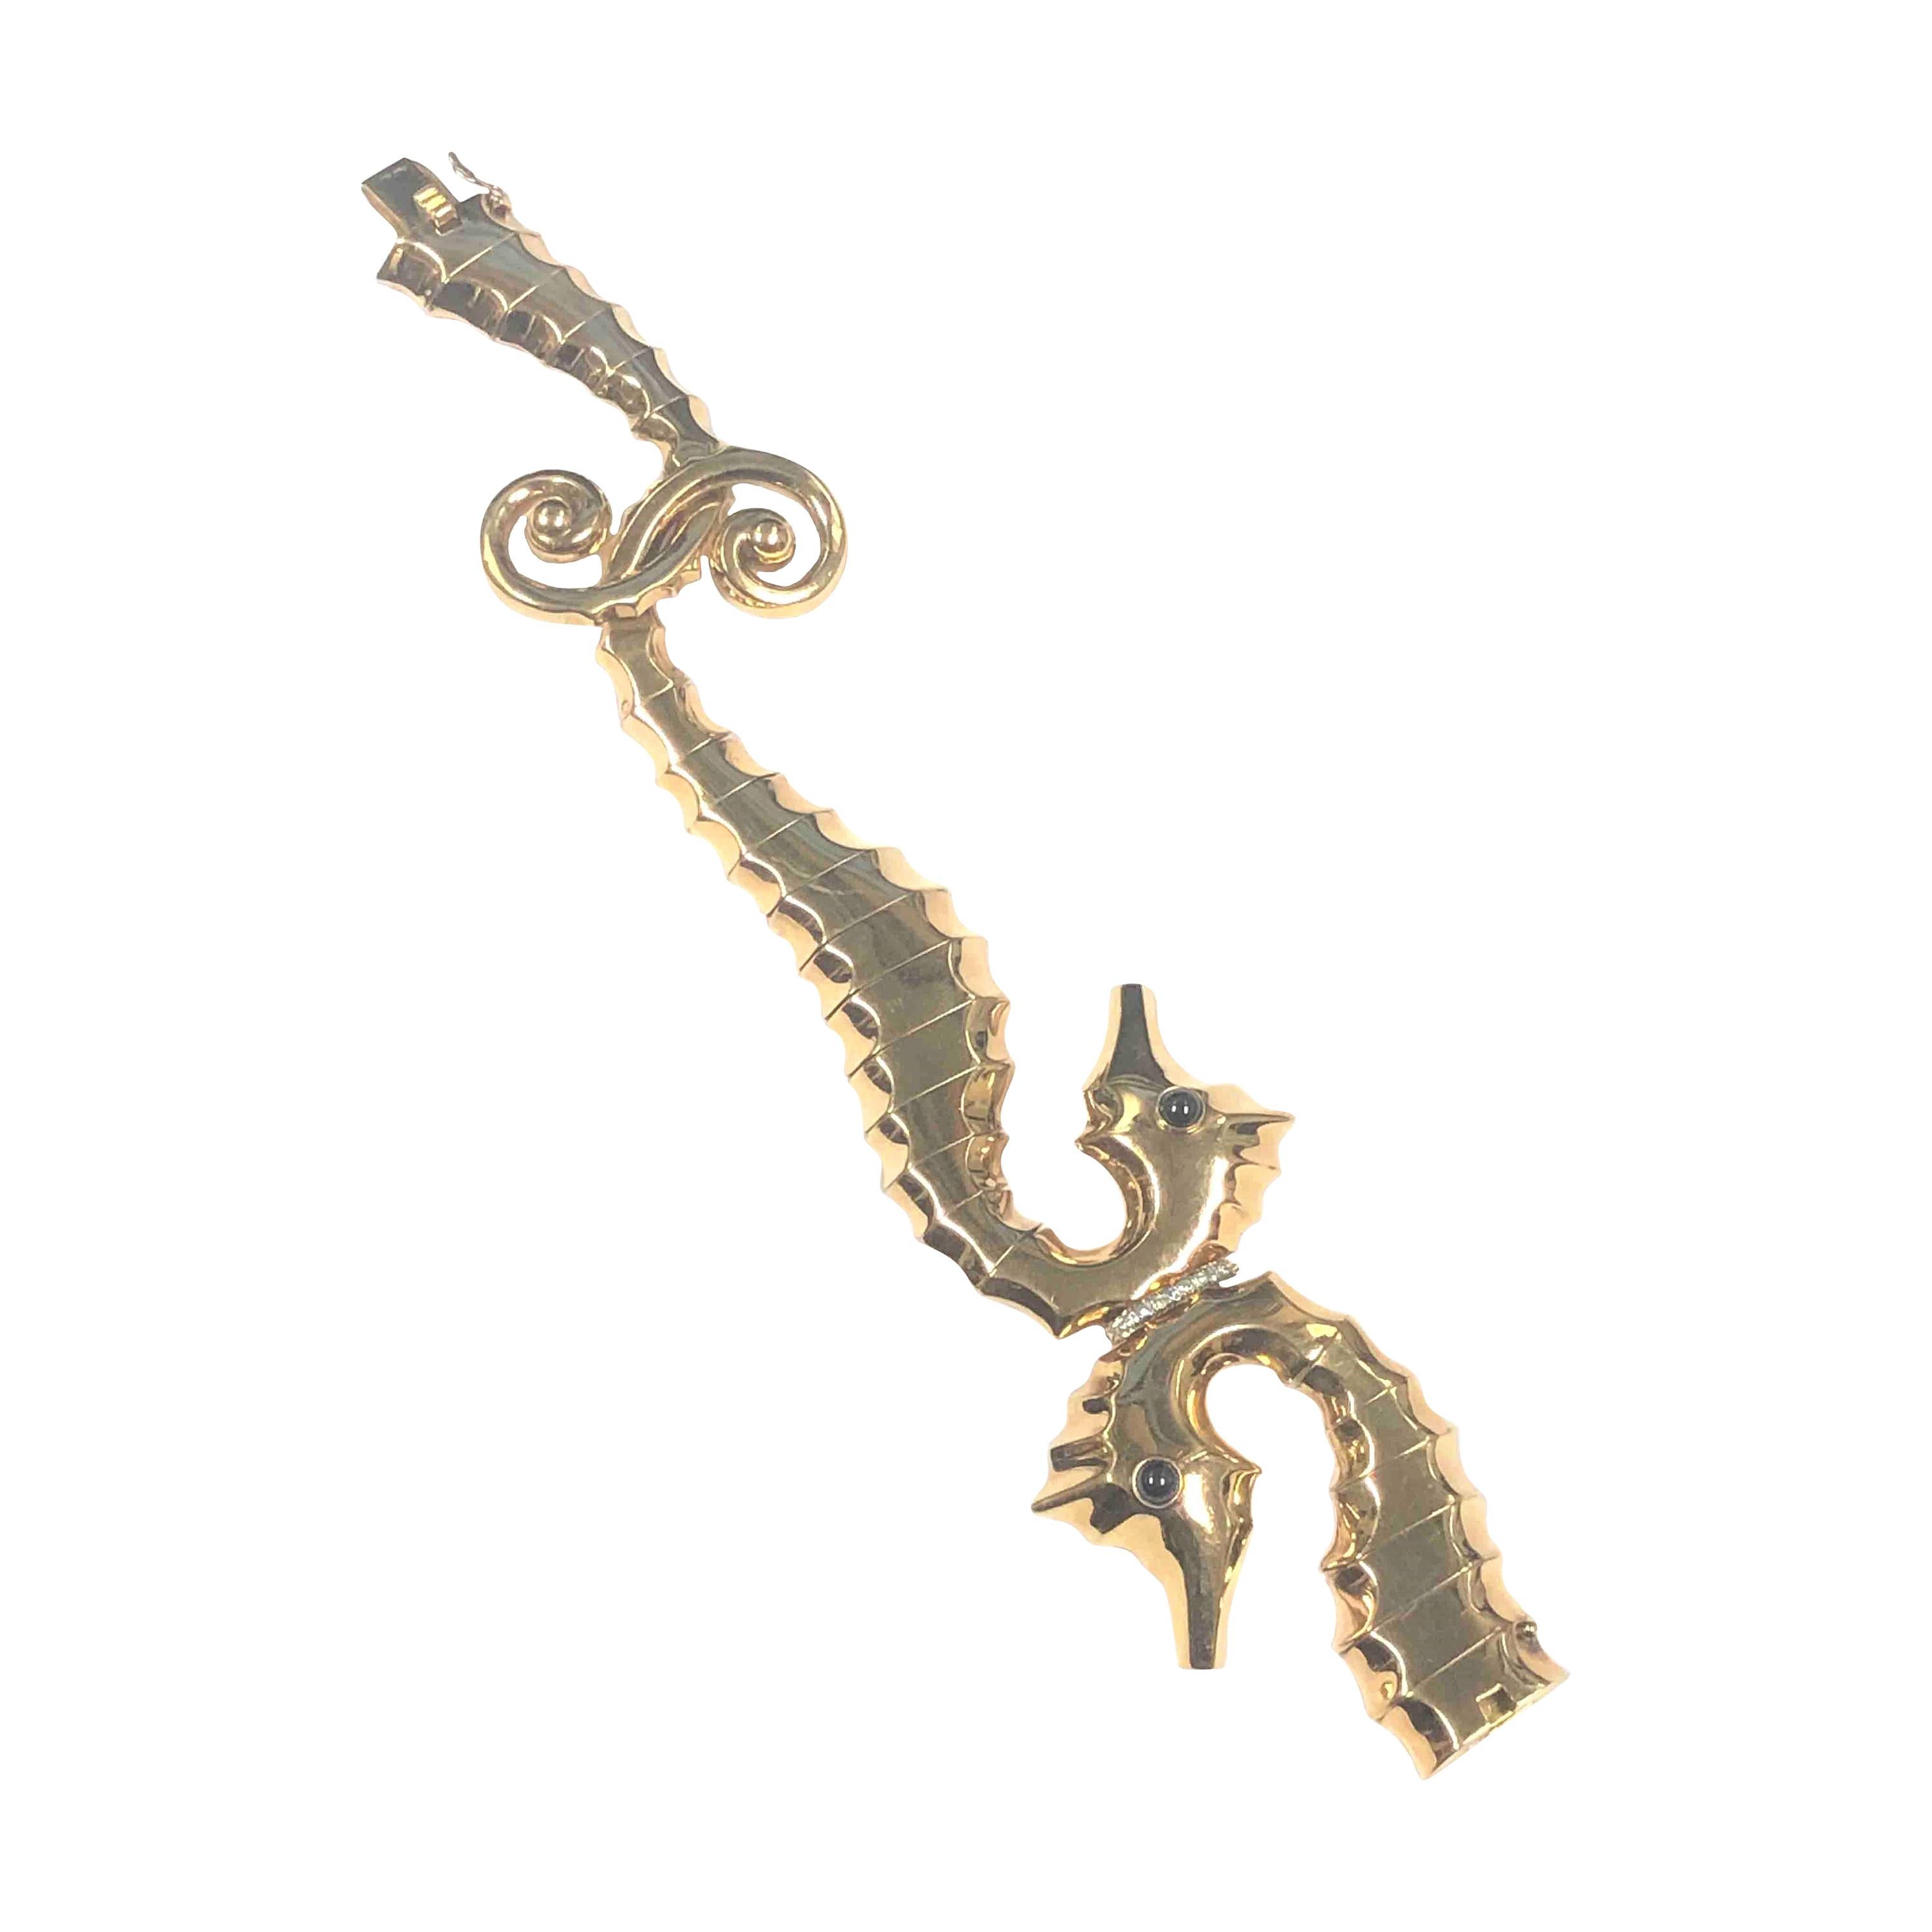 Circa 1940s Retro 18K Rose Gold Double Headed Sea Horse Bracelet, measuring 1 3/4 inches wide at the top, 8 inches in length and weighs 87.6 Grams. this piece is incredibly well made and detailed with each link being hinged for great flexibility.